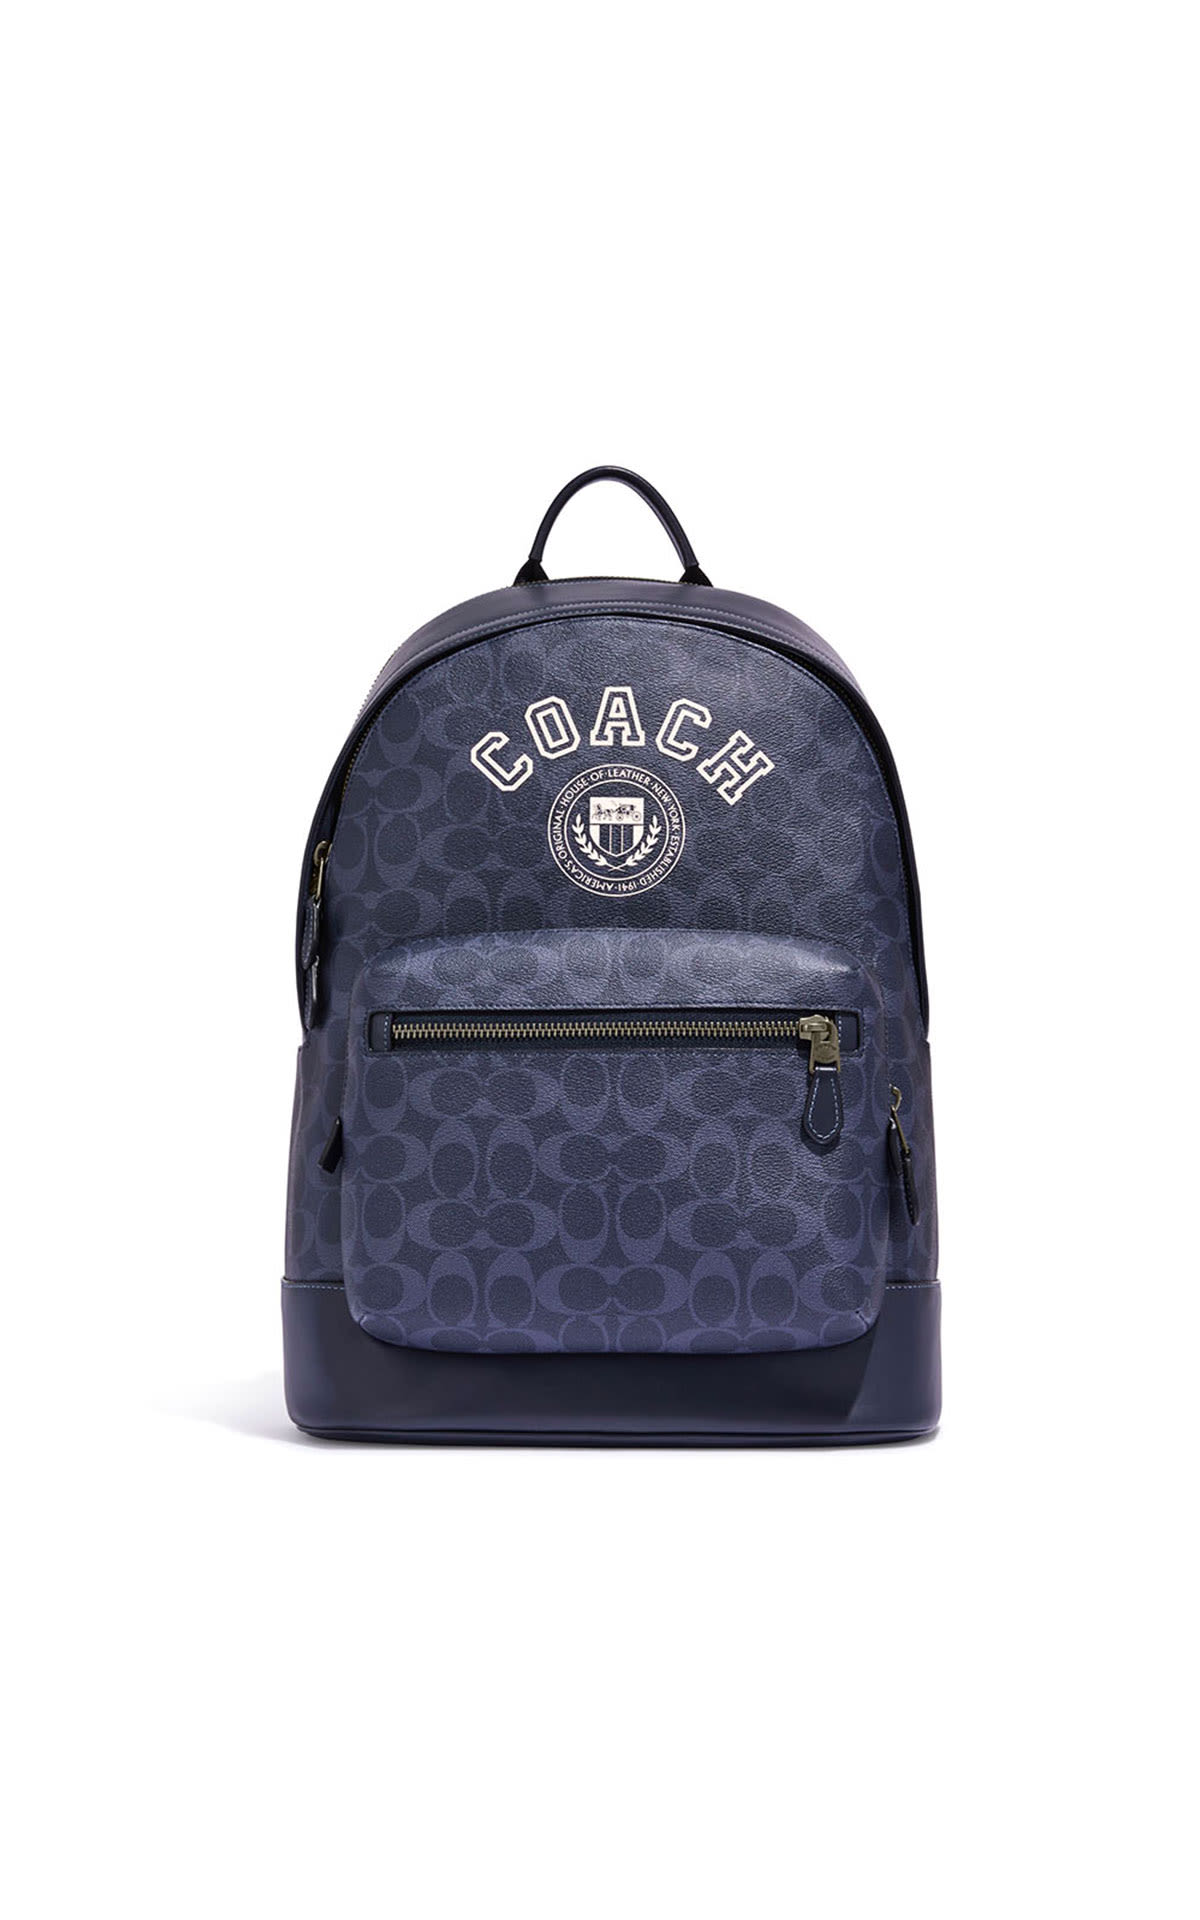 Coach The Varsity Collection backpack